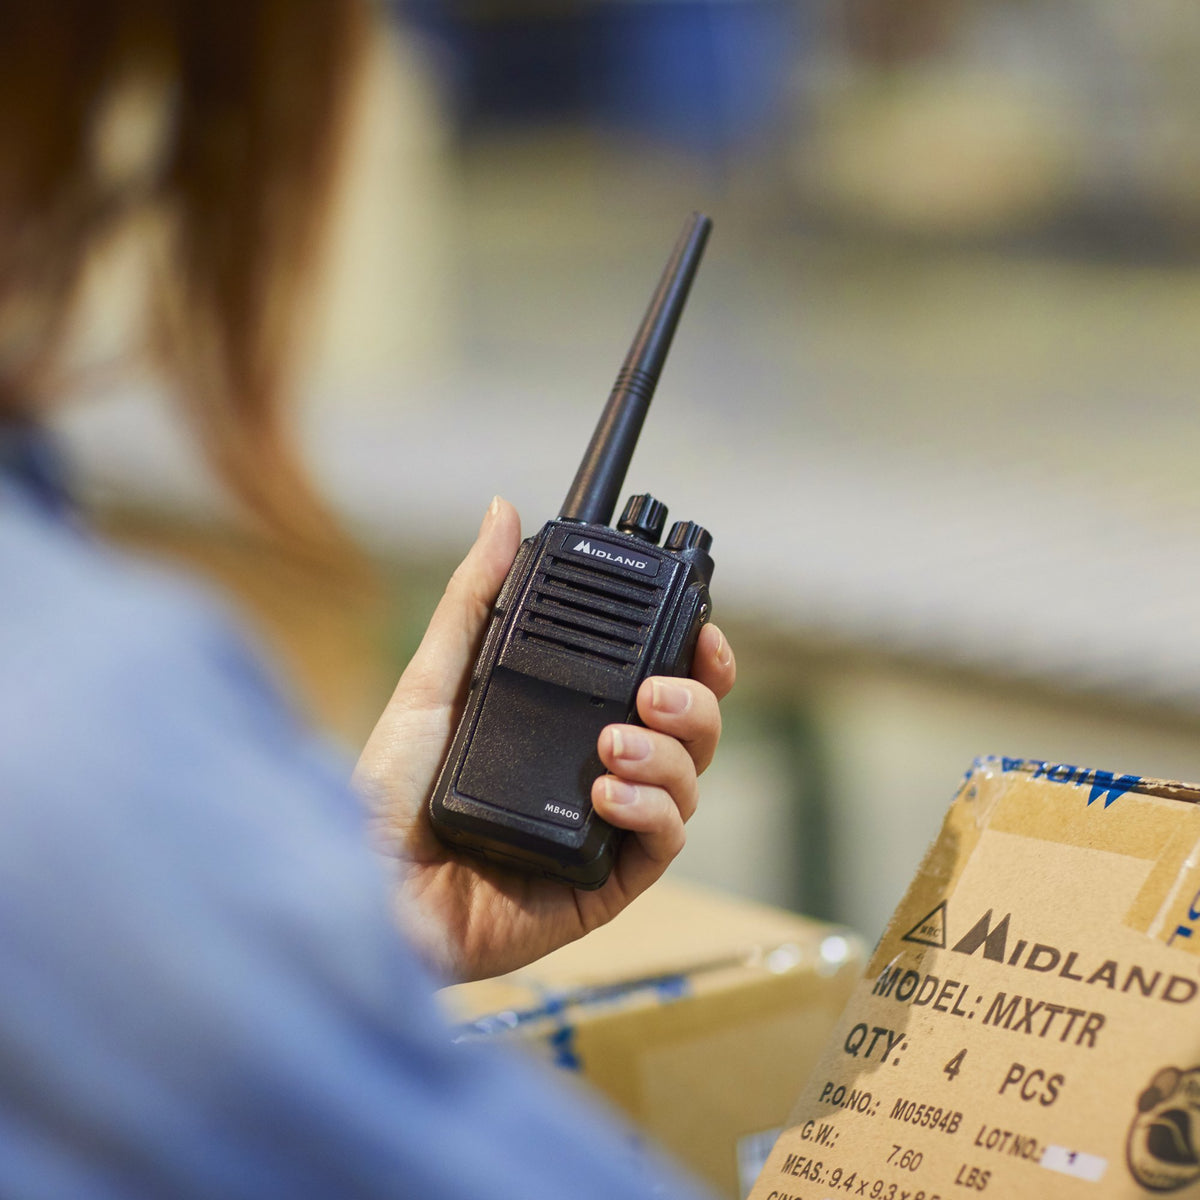 Midland MB400 Business Two-Way Radio Easy to Program Long-Range 16 Channels Coverage for up to a 350,000 Square Foot Warehouse Construction Ho - 4